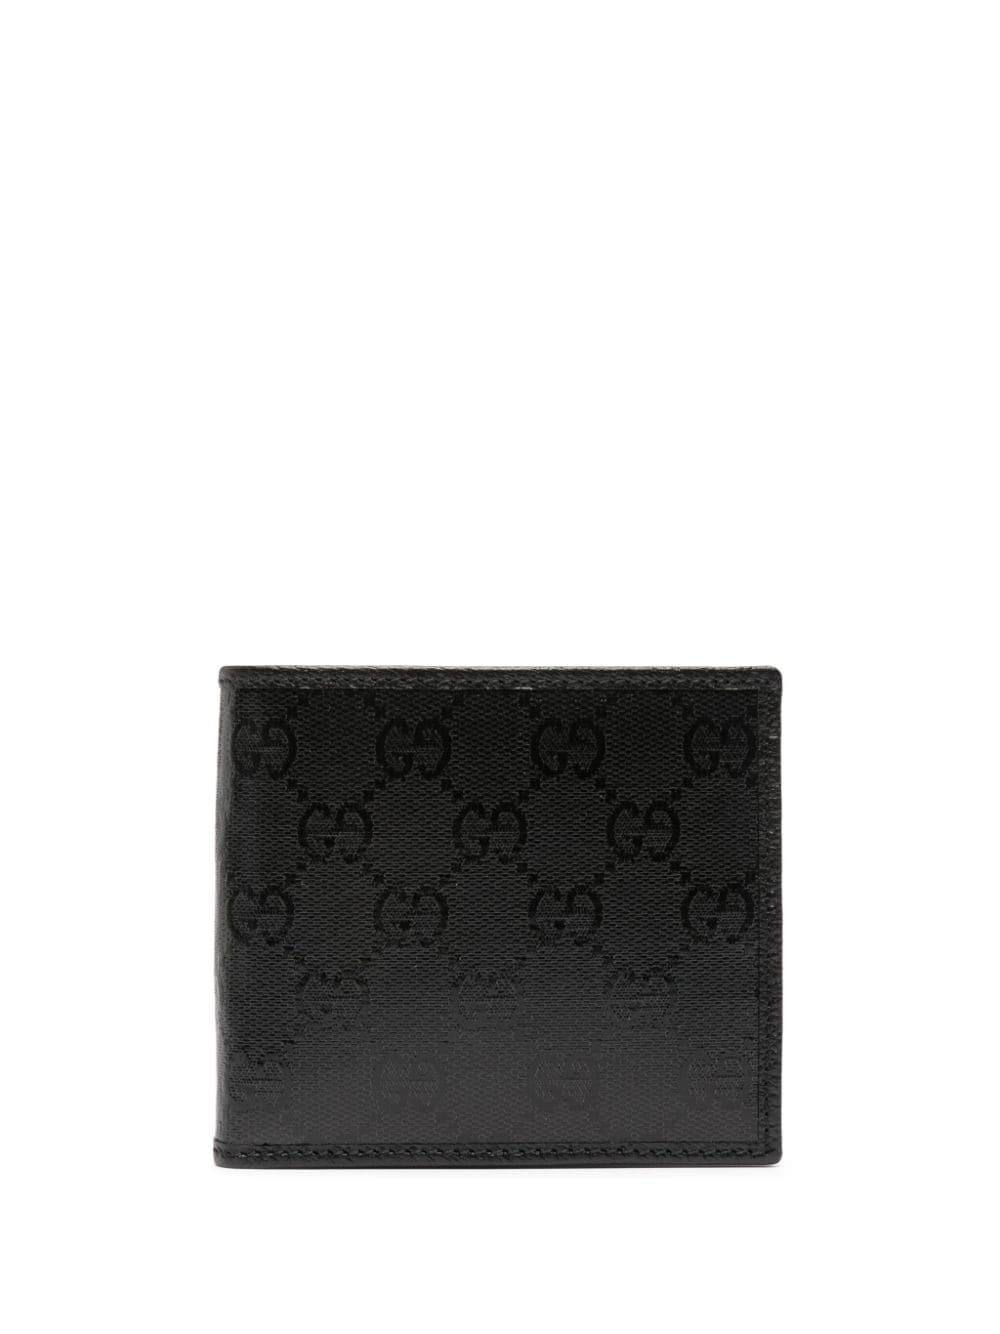 Gucci GG Leather Wallet - Black - Wallets